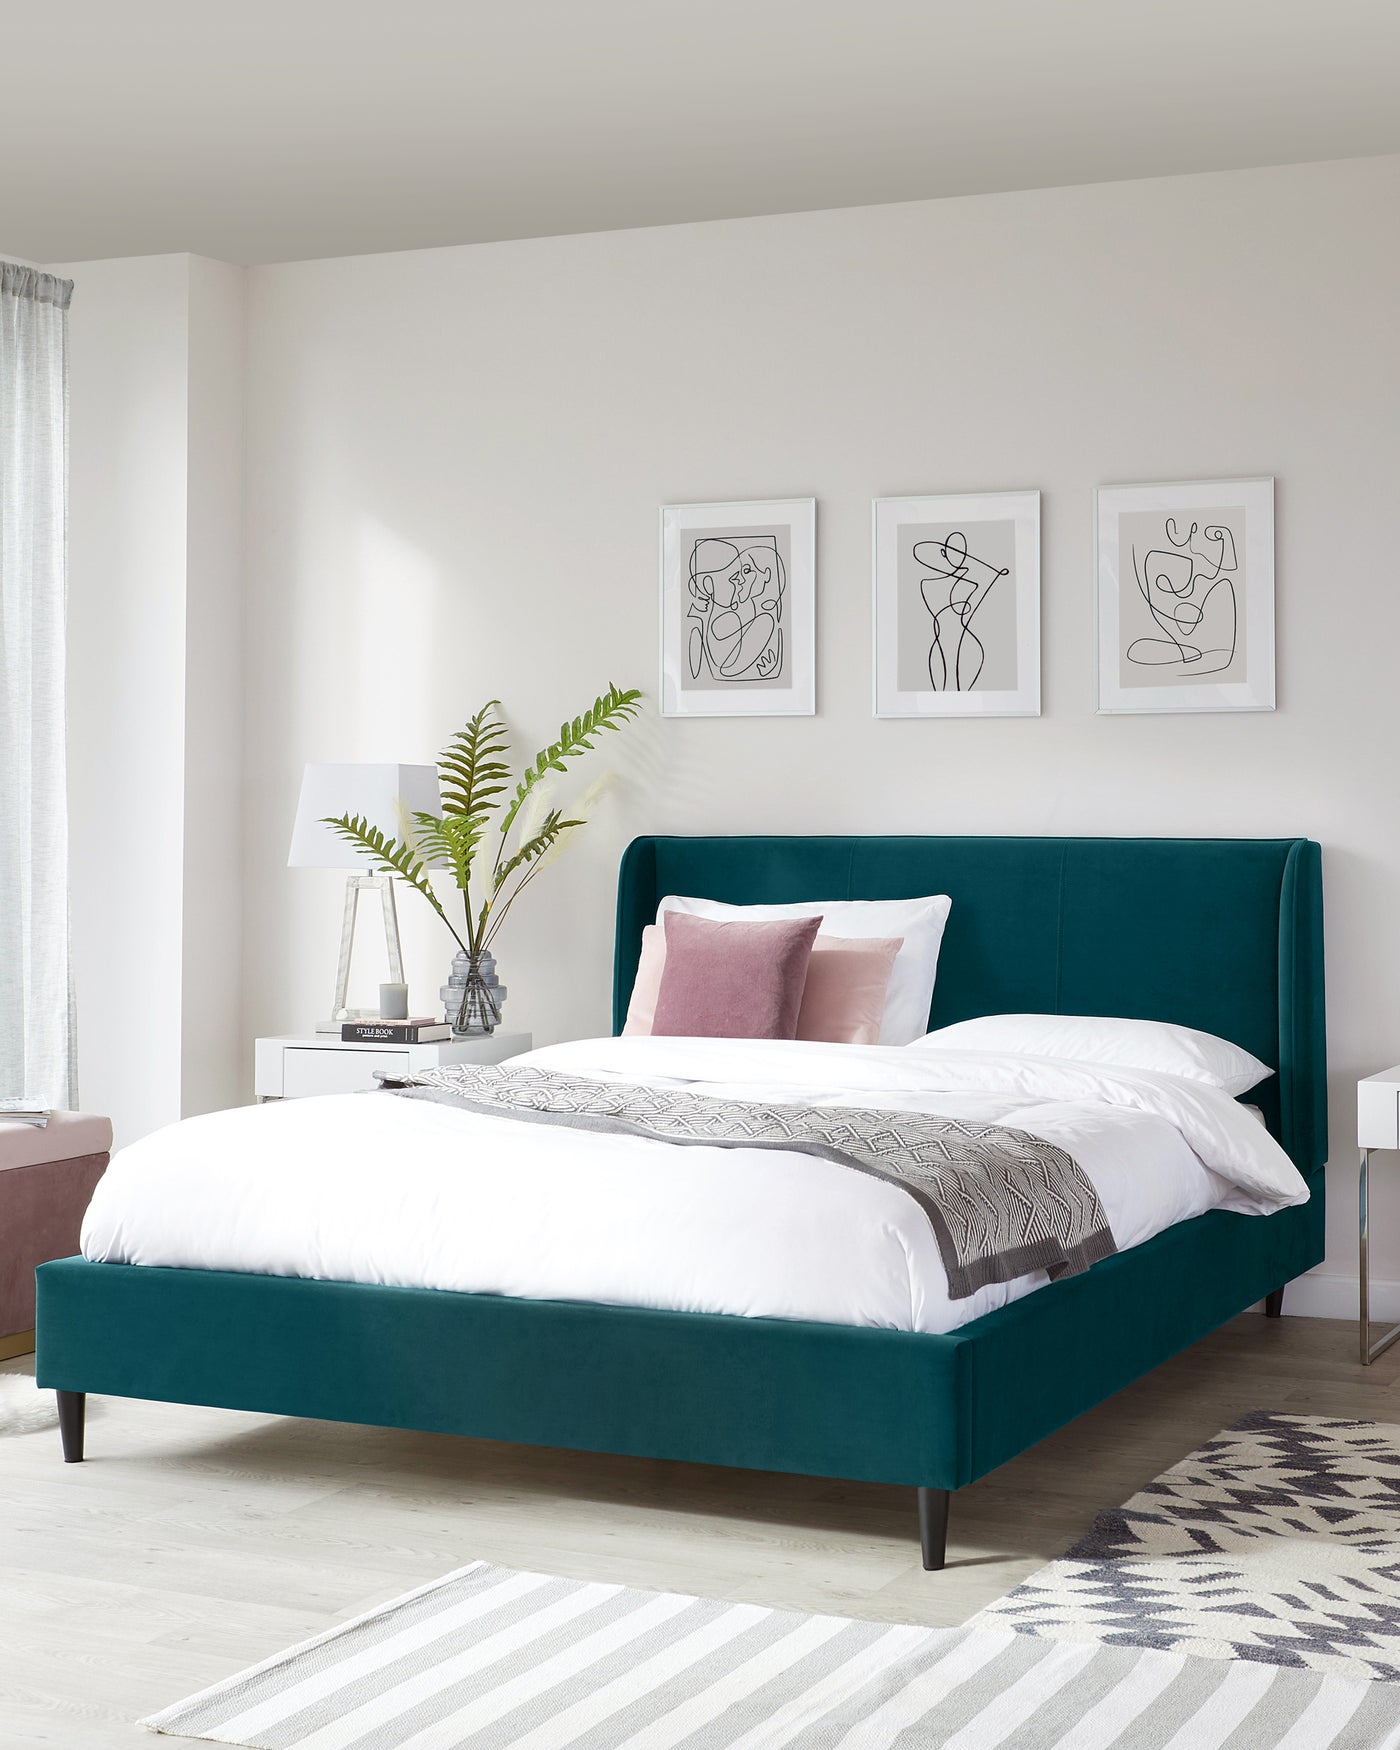 Elegant teal upholstered bed with a high, straight-lined headboard and low-profile design, paired with a simple white nightstand.